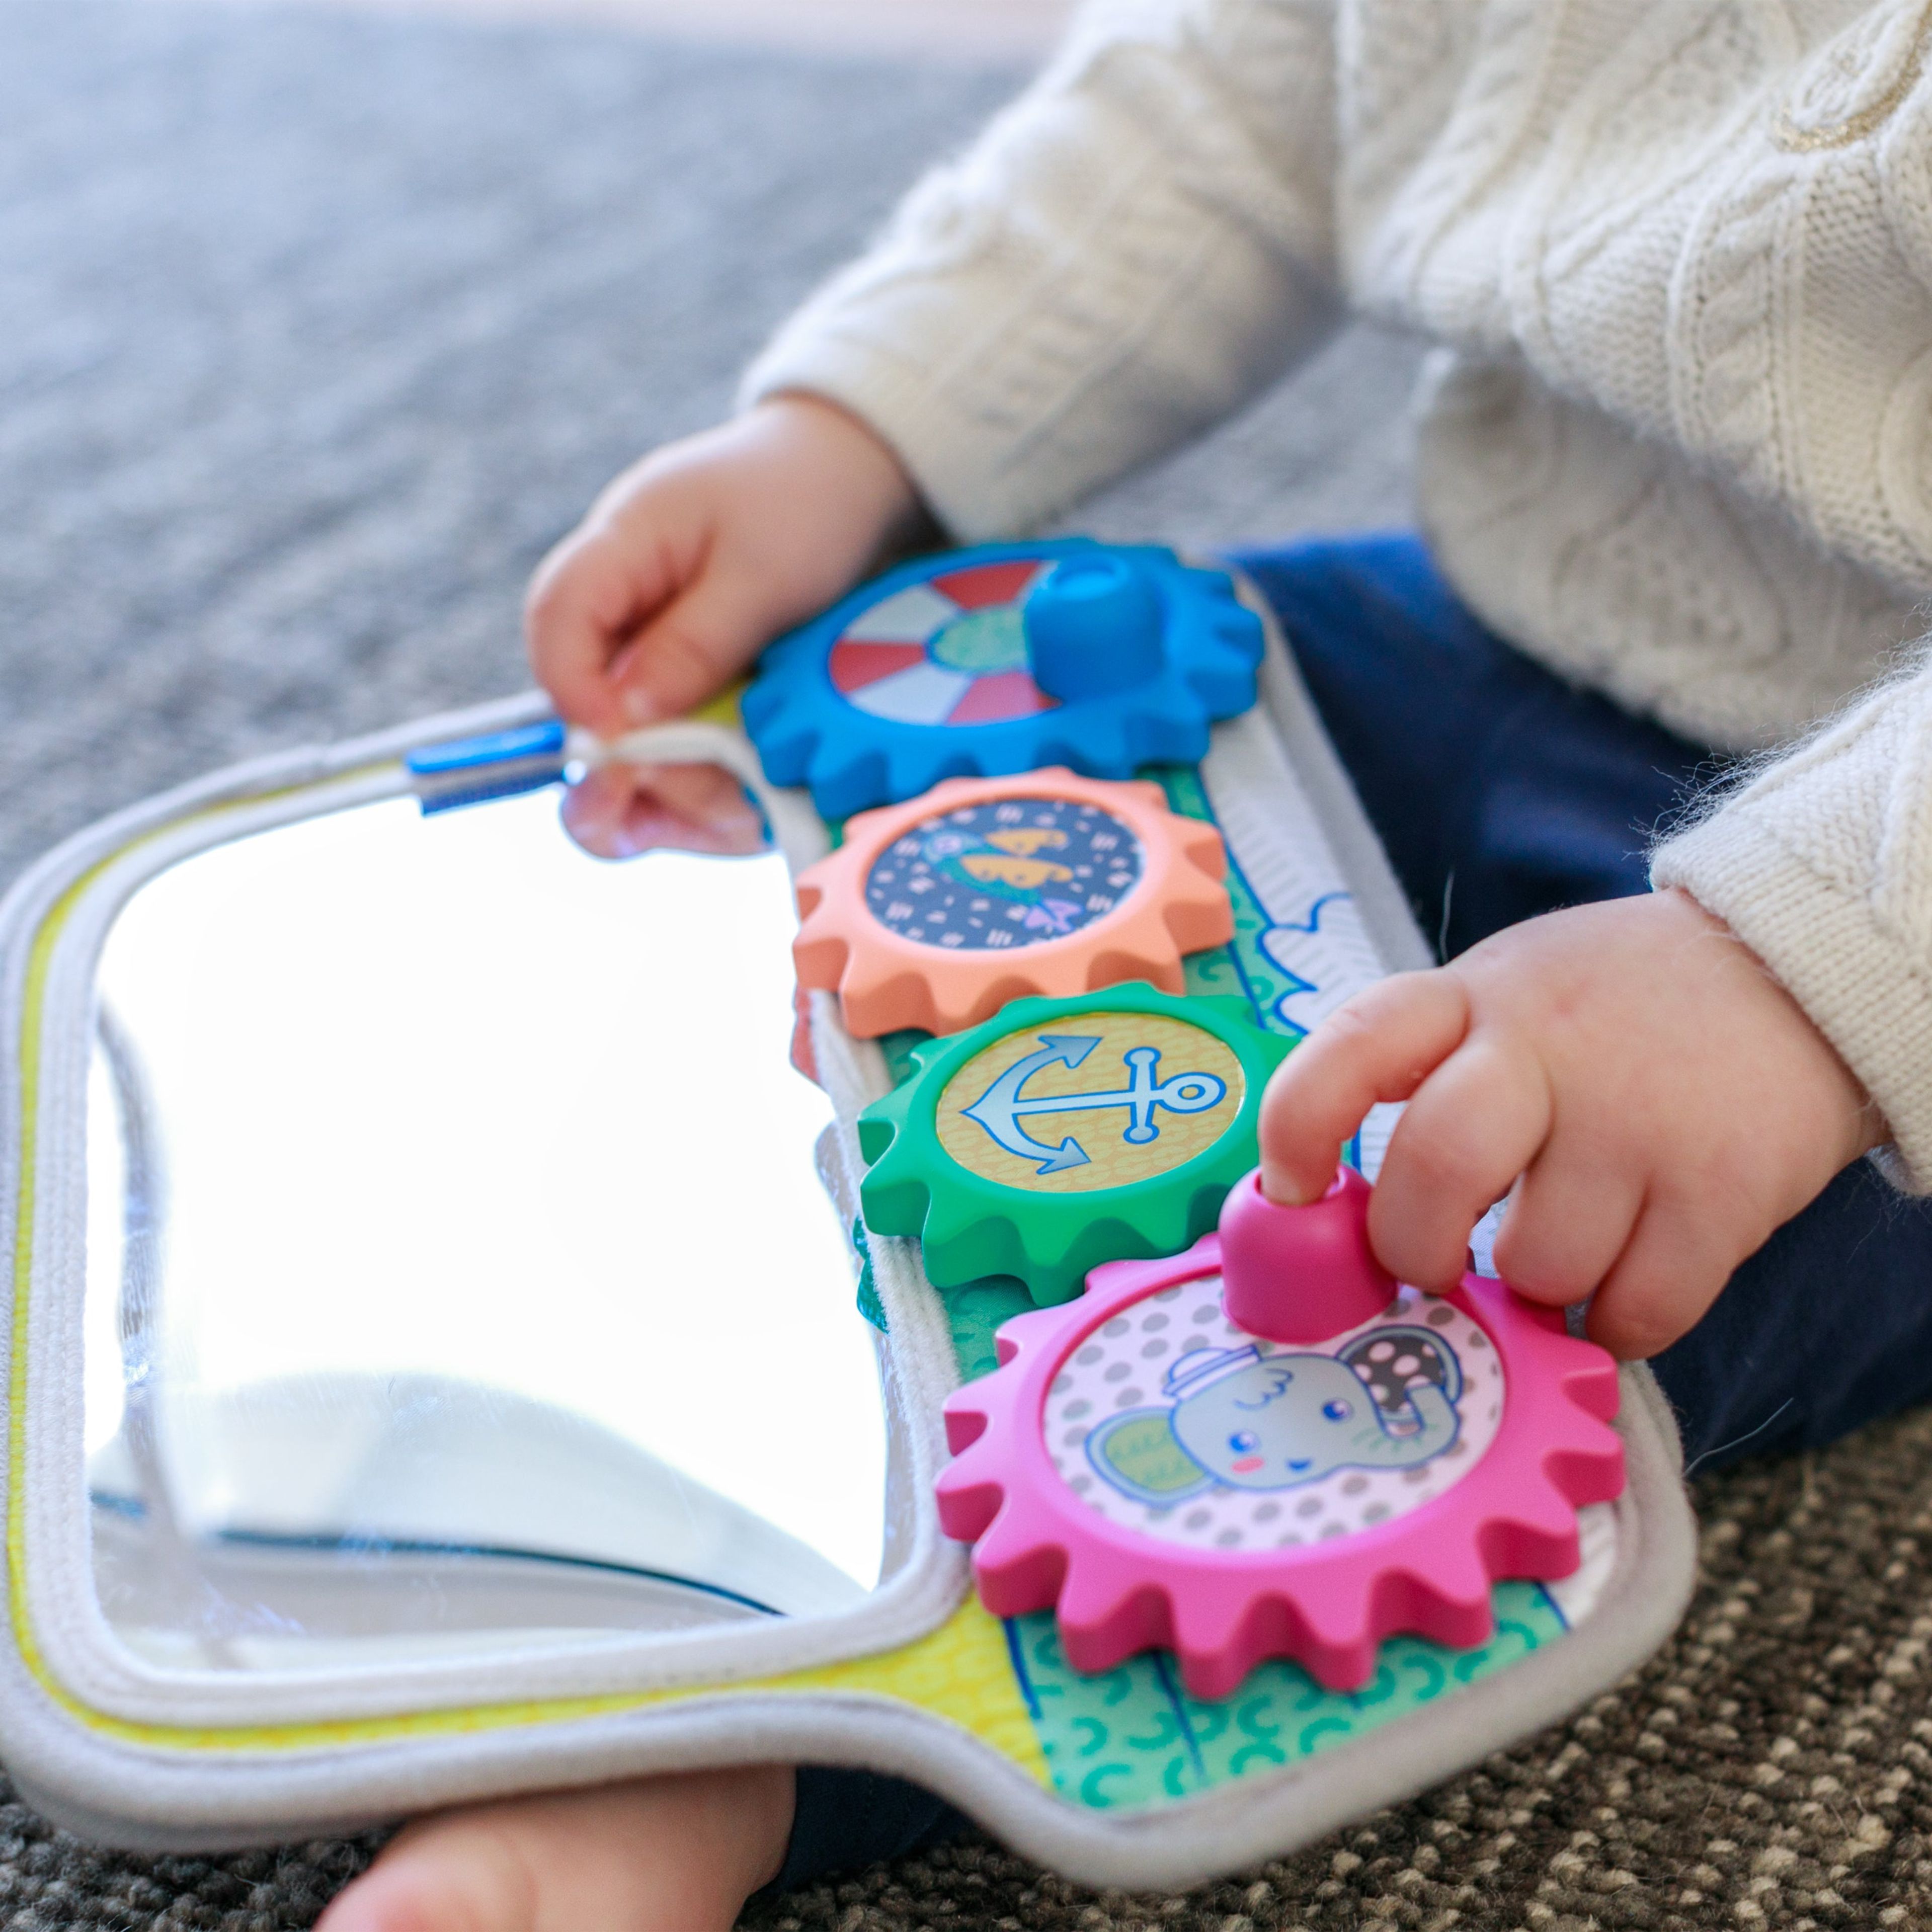 Busy Board Mirror & Sensory Discovery Toy